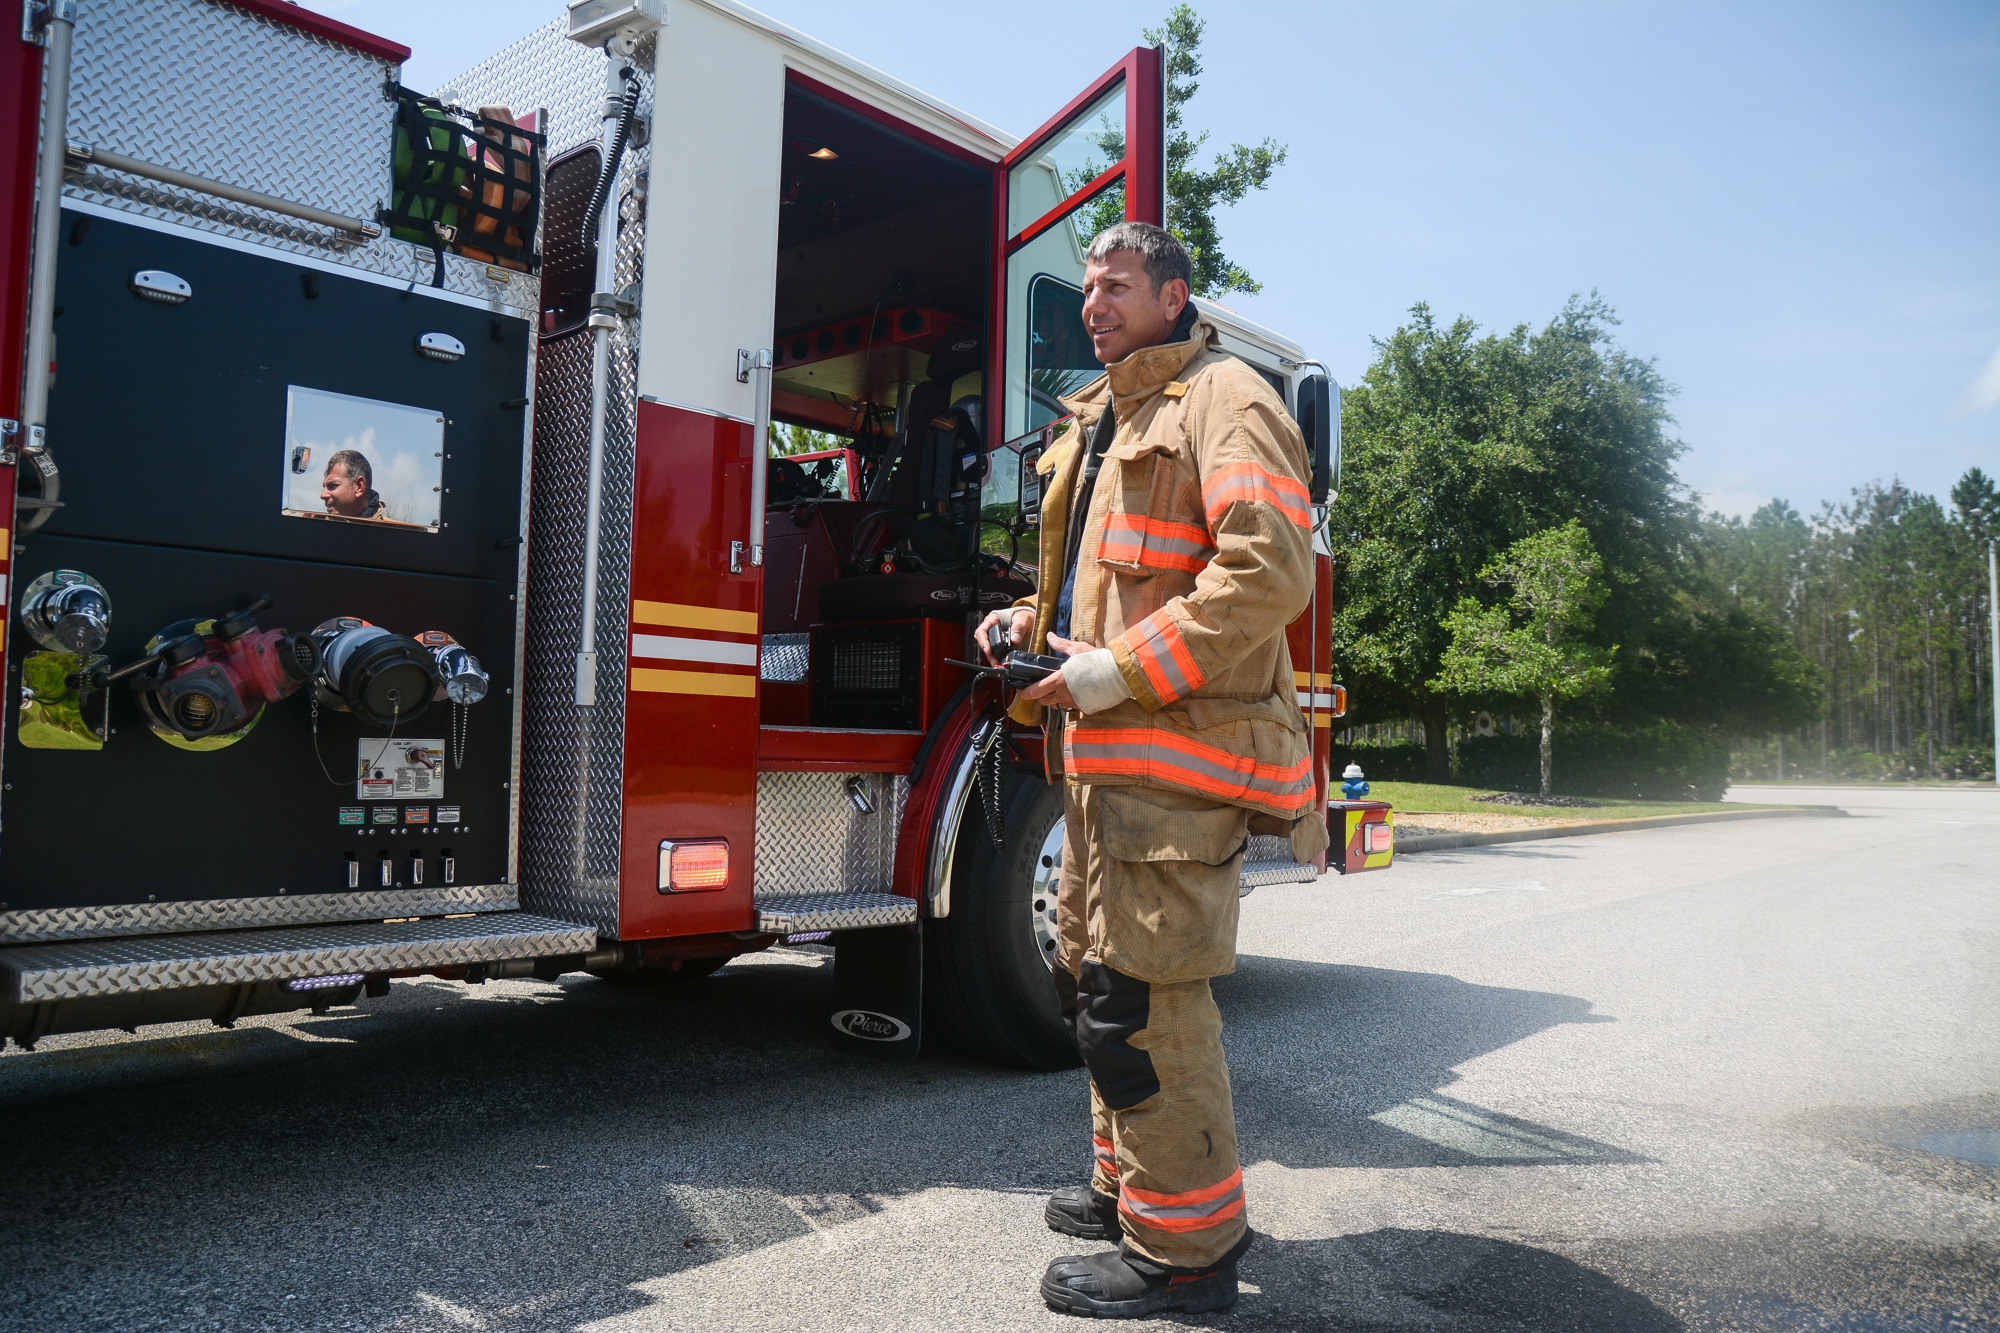 Lt. Jason Wagner exits Fire Engine 23 after returning to the station when a call for a fire alarm was cancelled mid-route. Photo by Paige Wilson